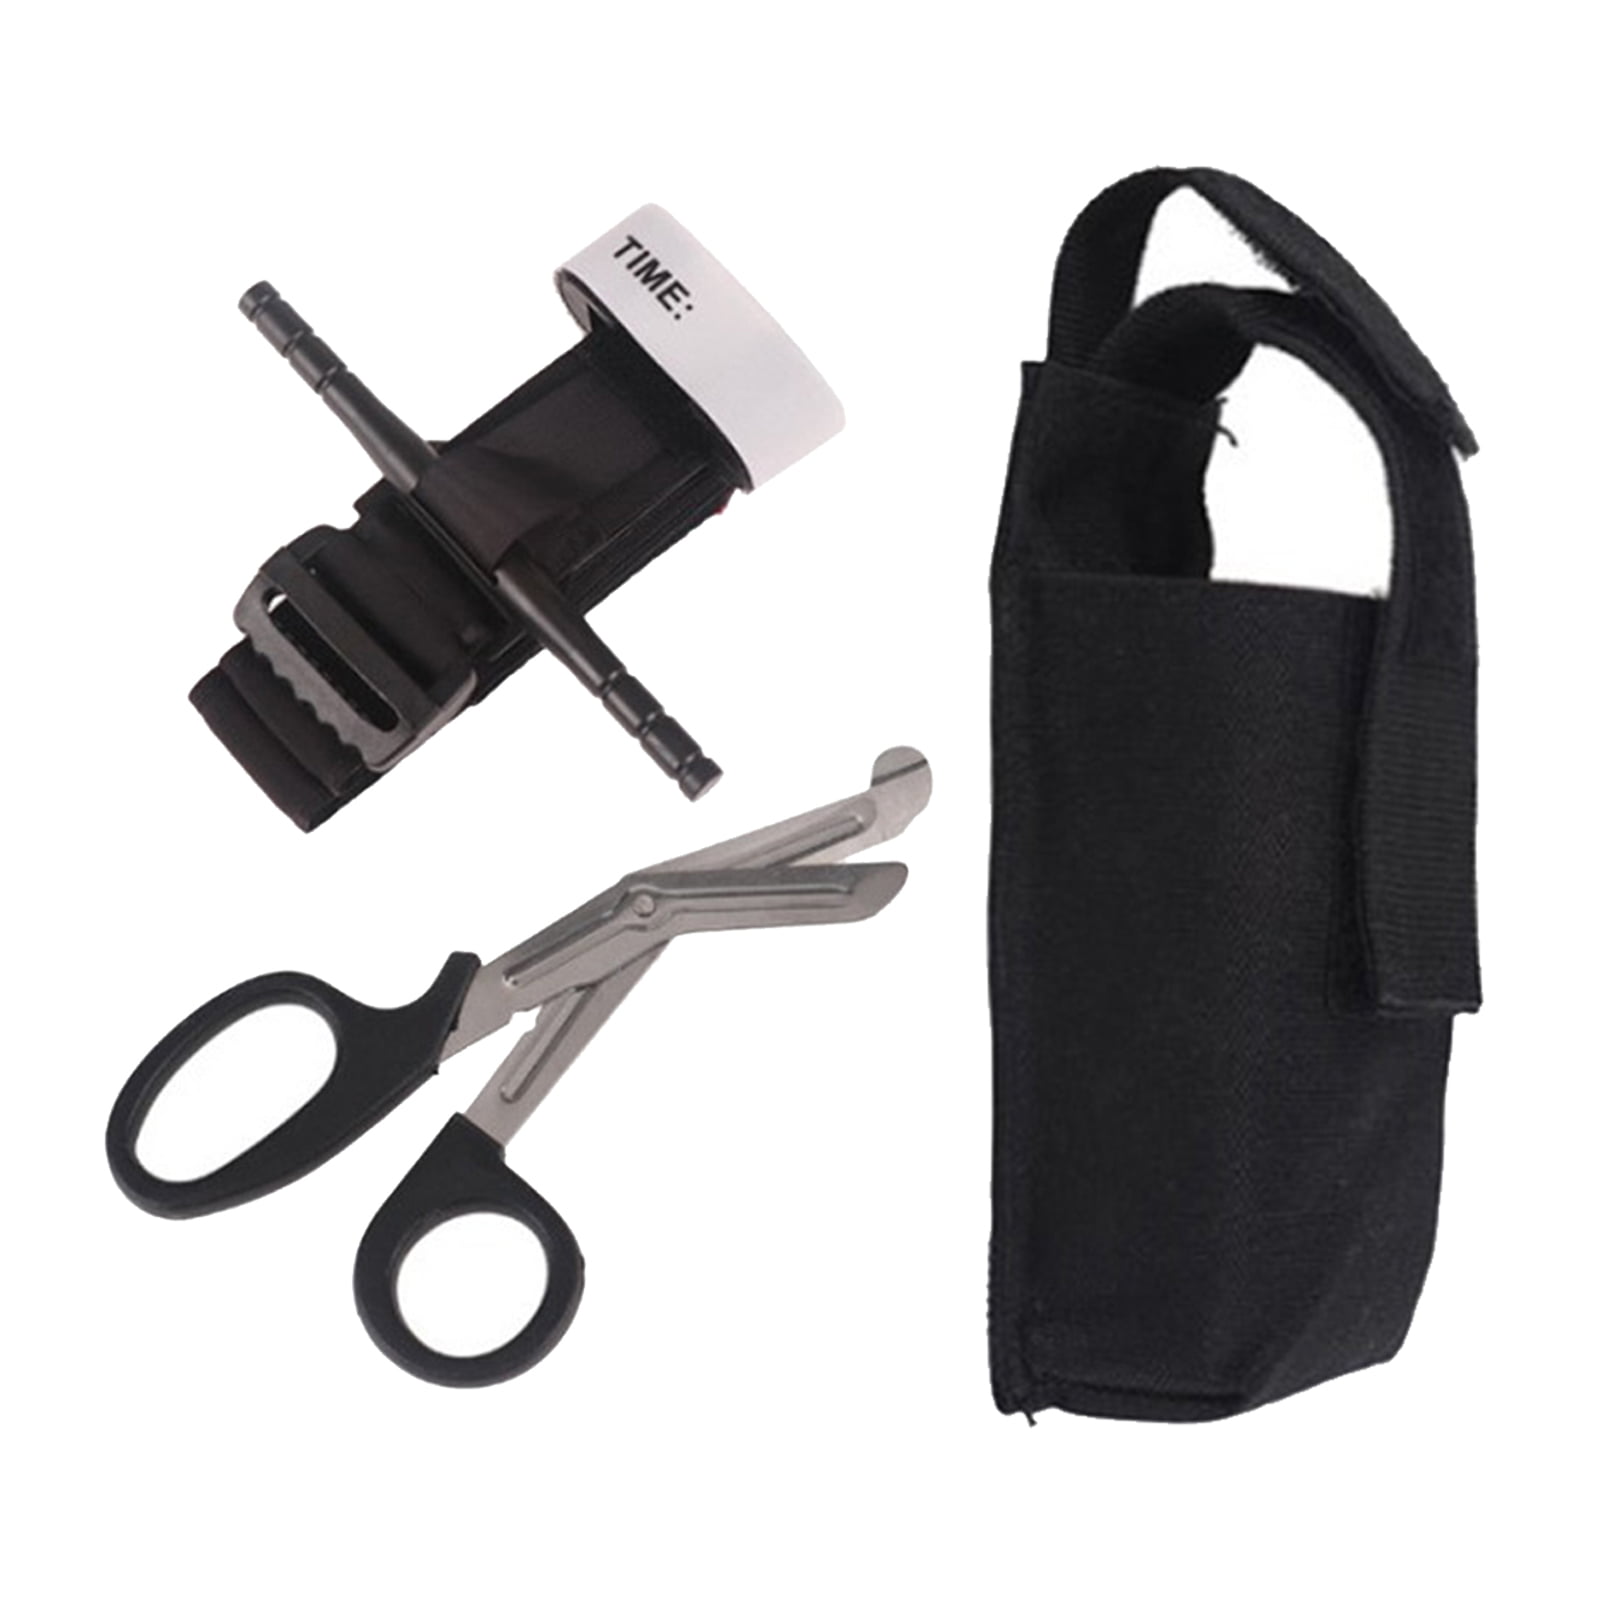 MagiDeal Outdoor Tourniquet Pouch with Shears Slot